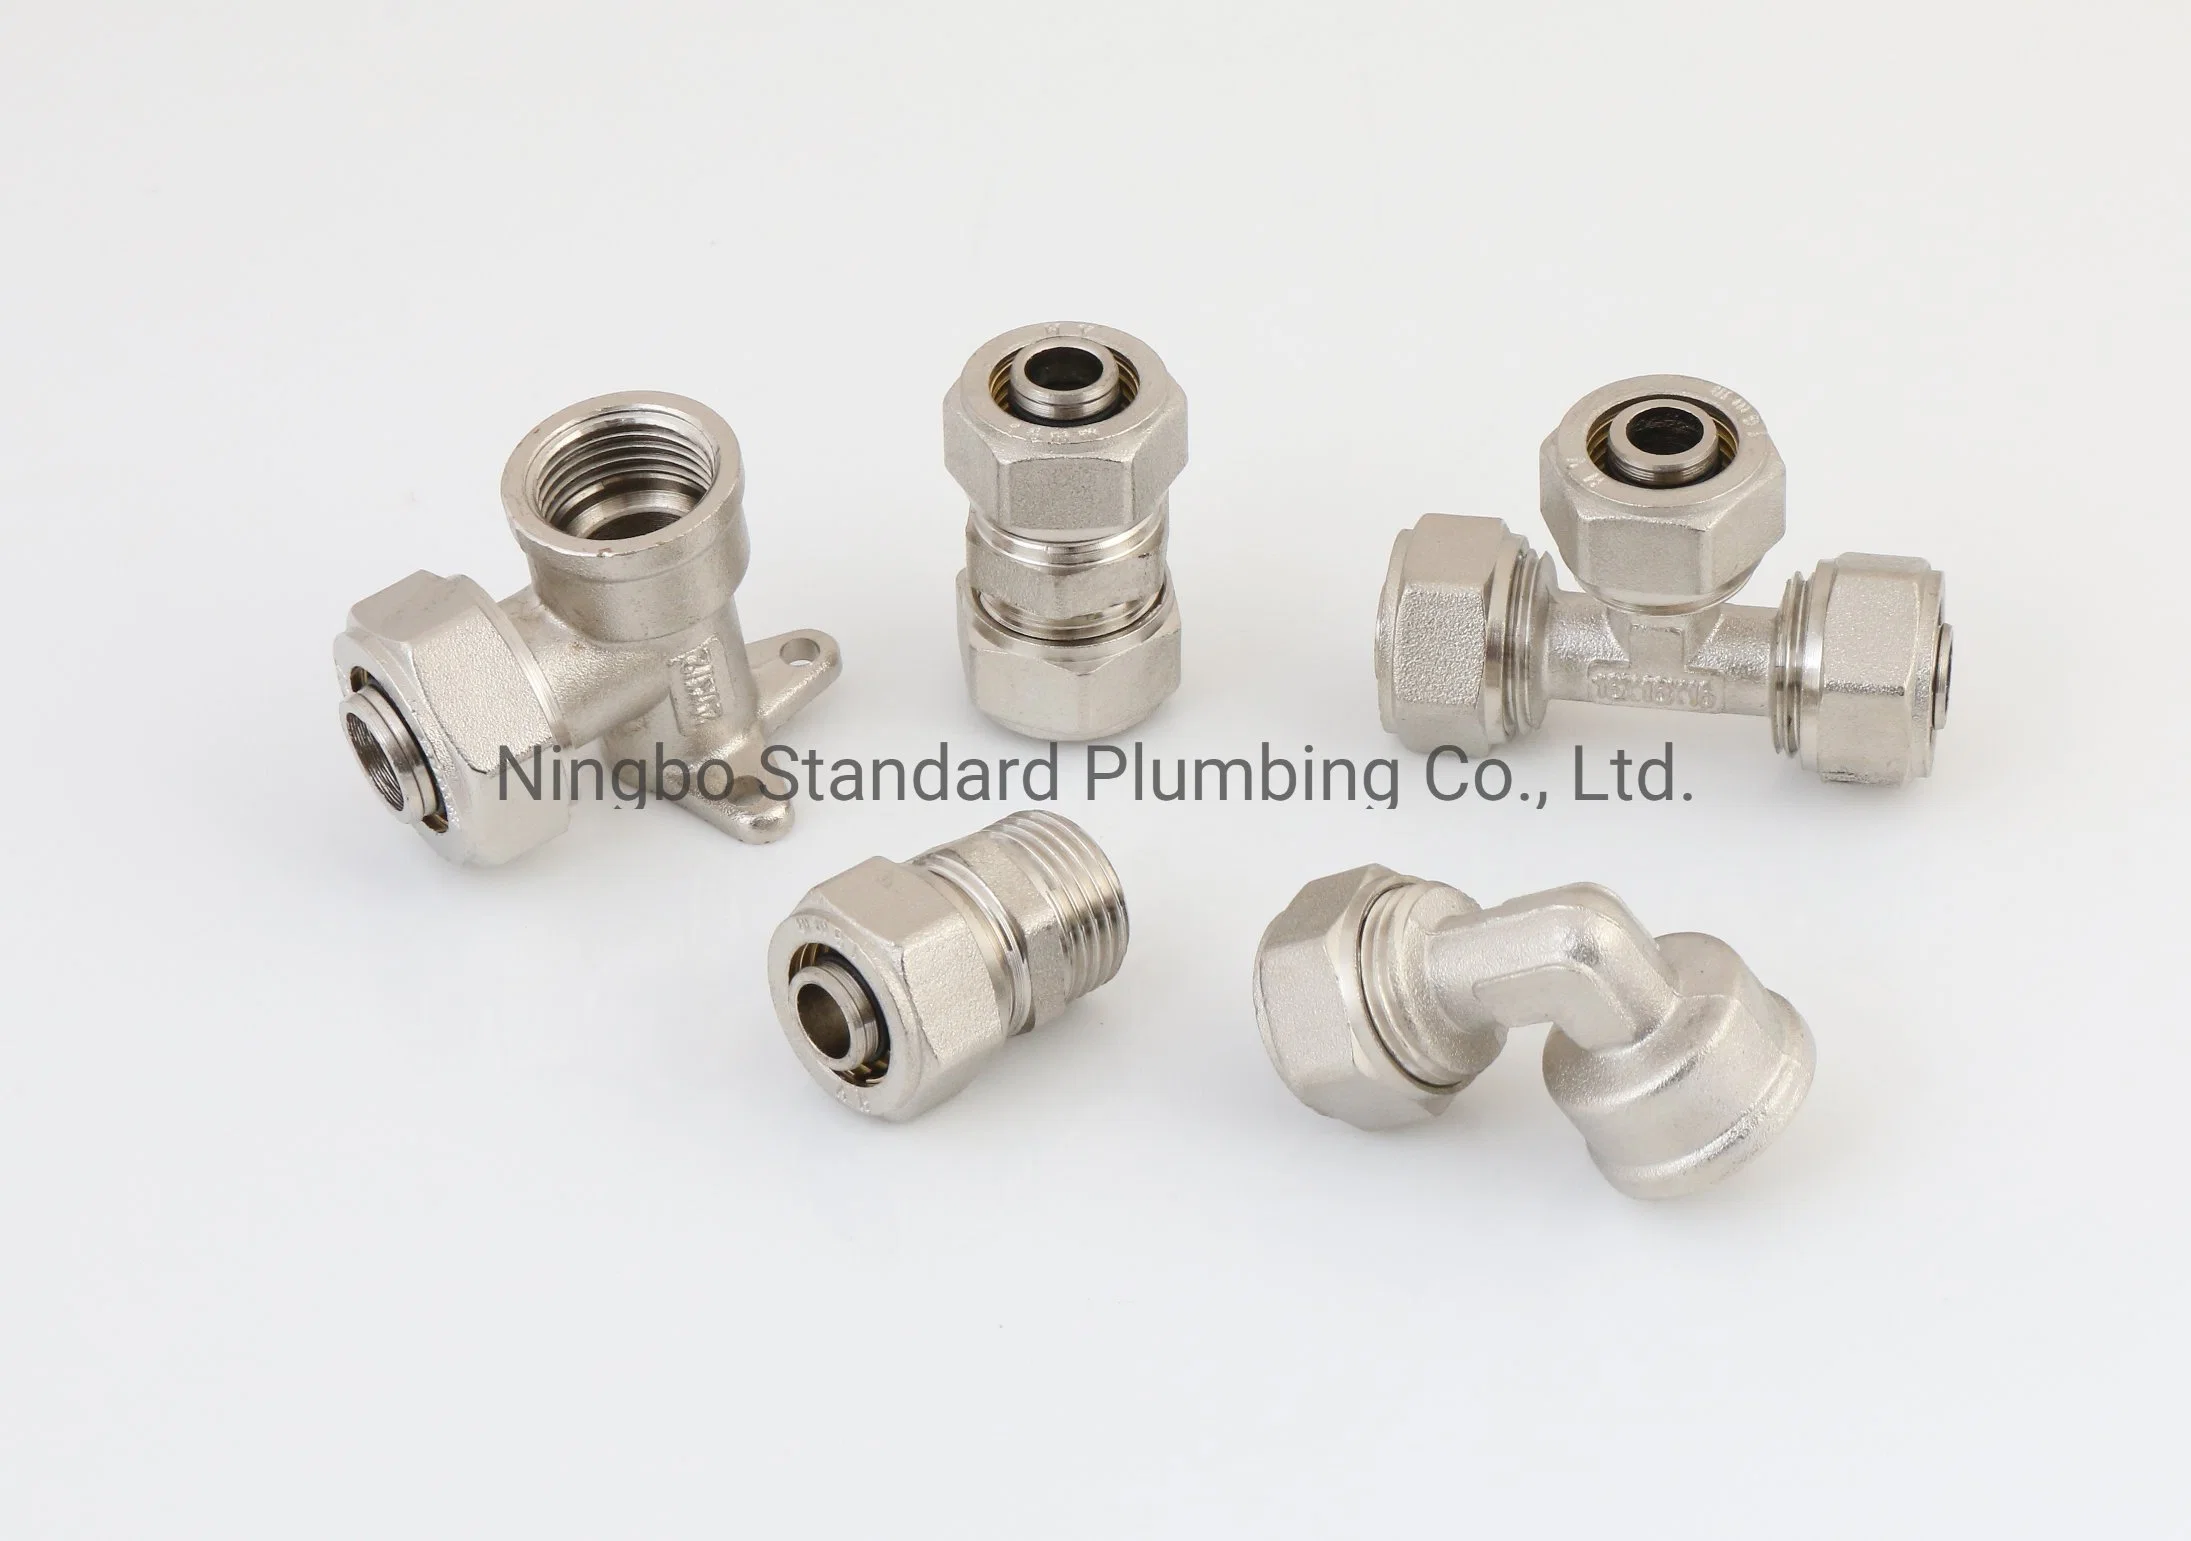 Brass Compression Elbow Union Fittings for Pex-Al-Pex Pipes